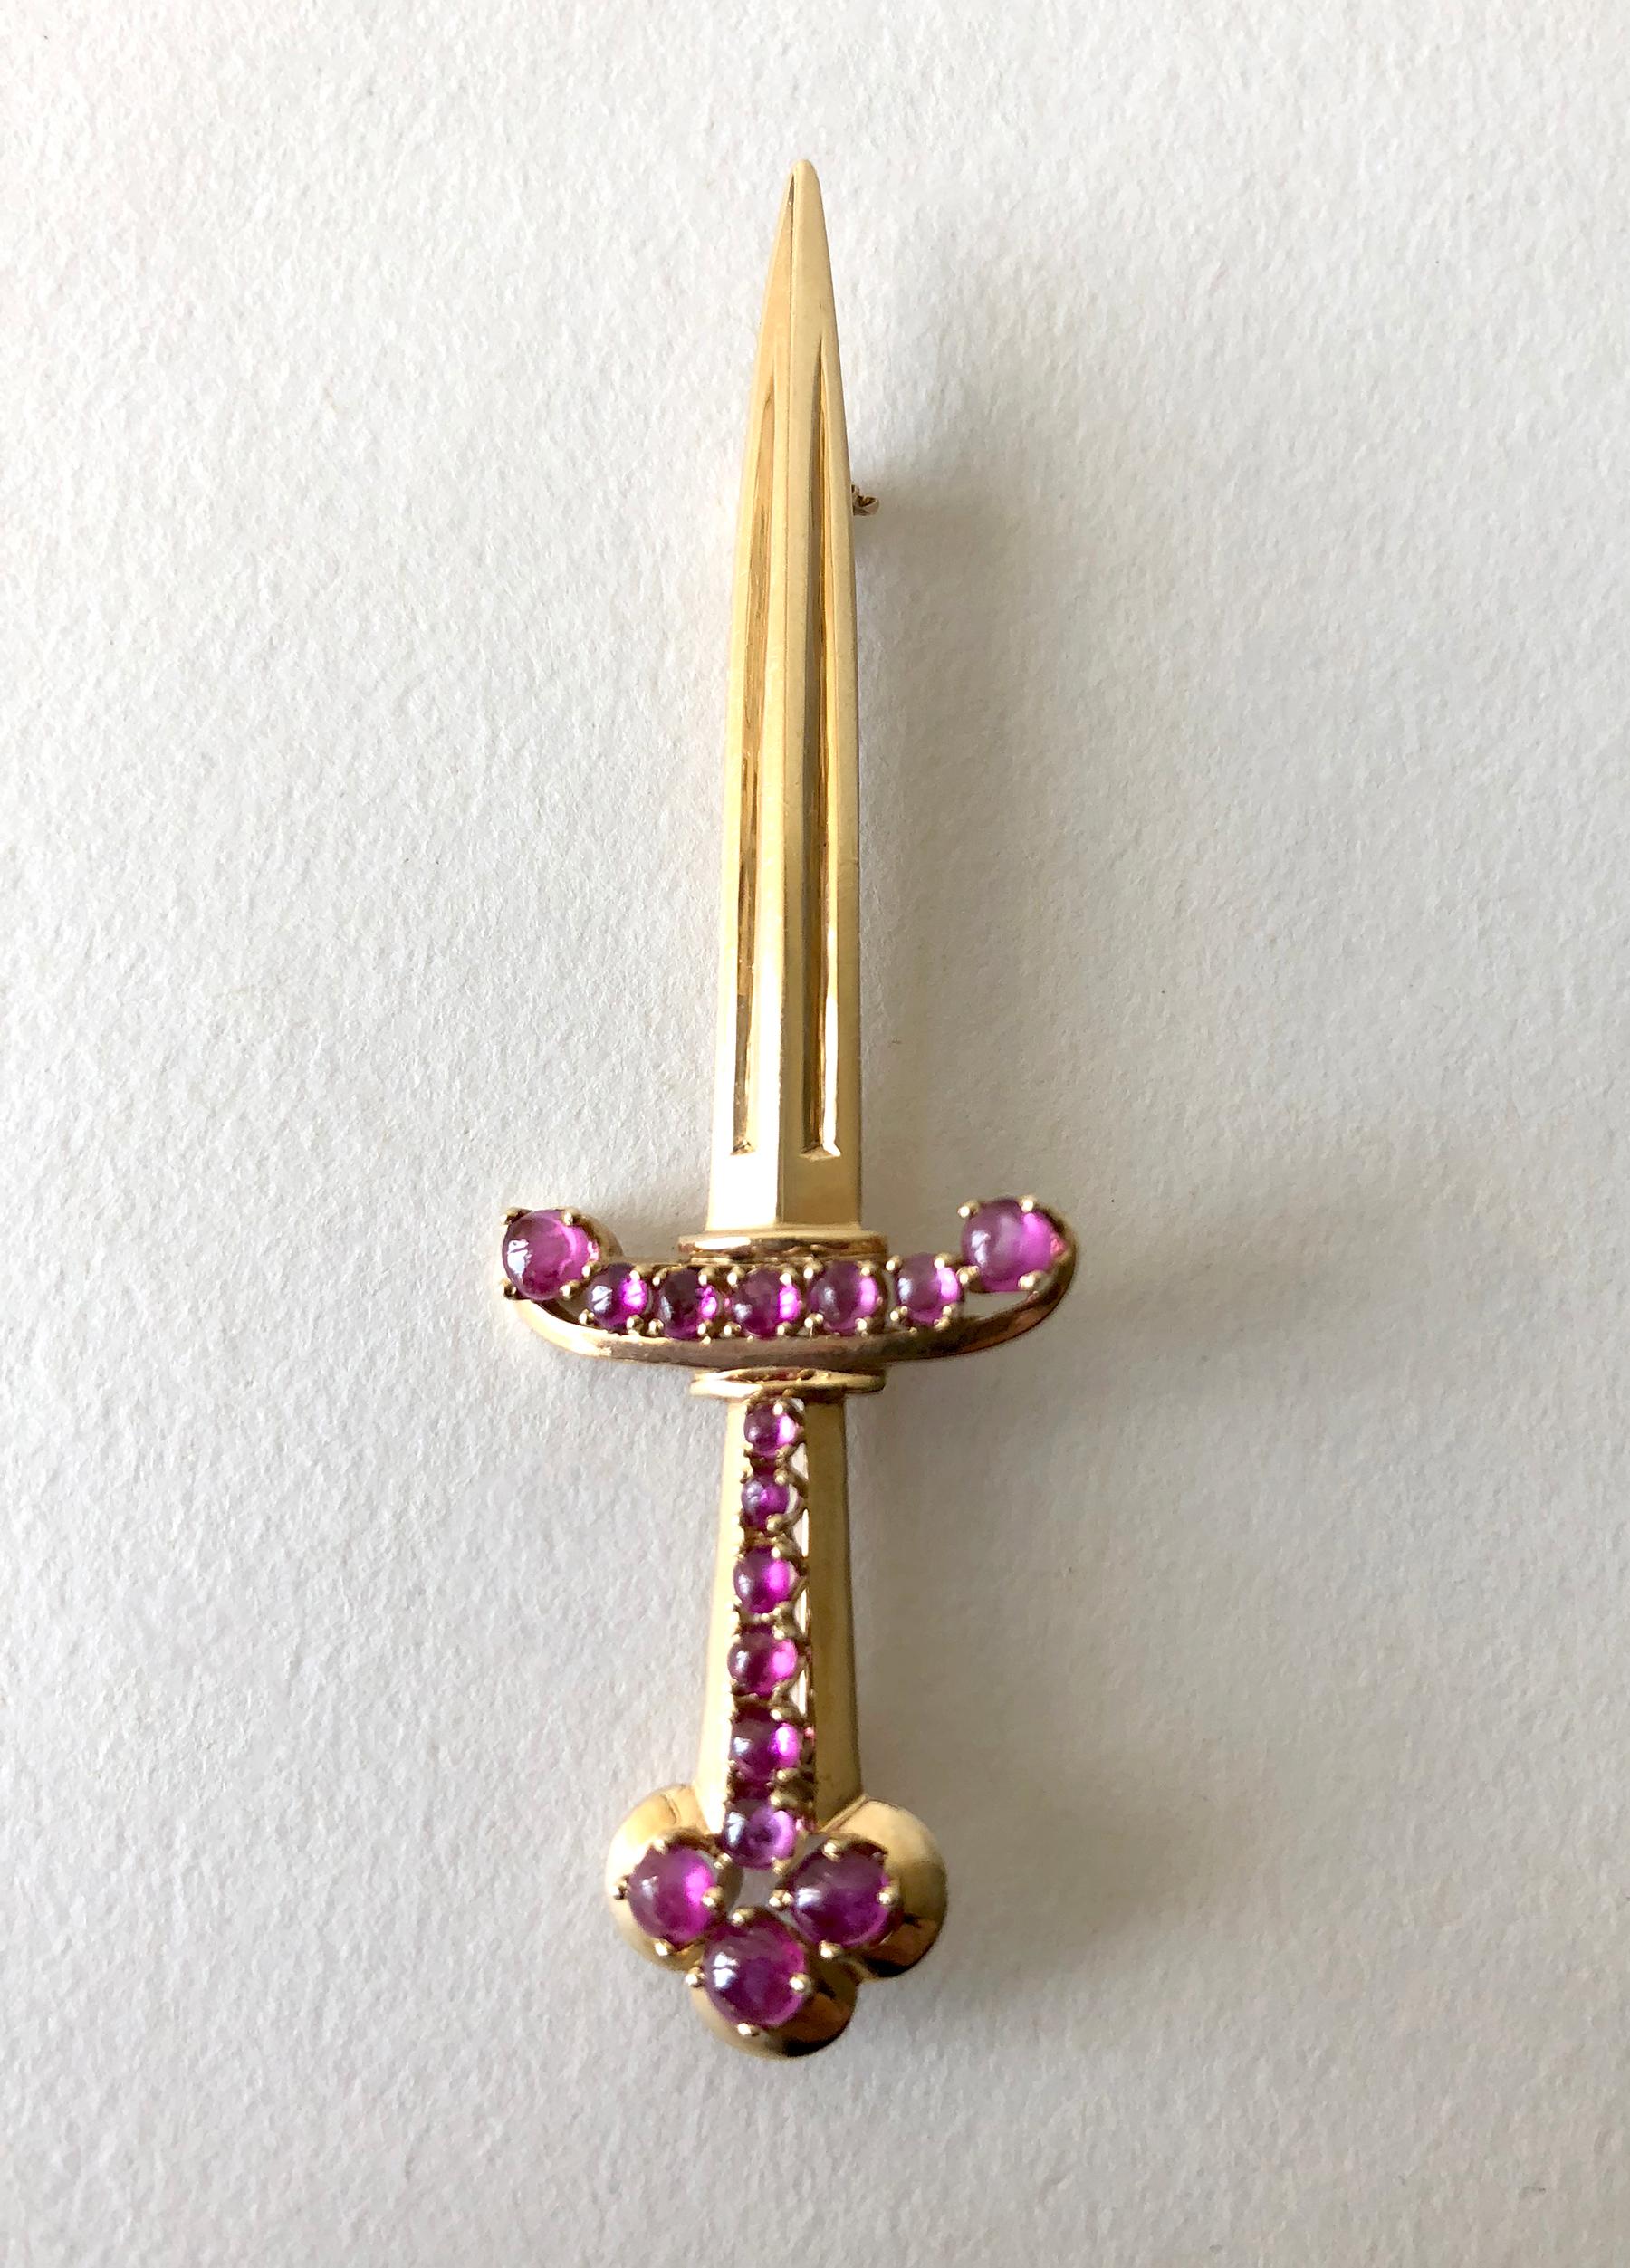 1950's 14K rose gold sword pin with ruby encrusted handle created by Paul Lackritz Jewelers of Beverly Hills.  Brooch measures 2 3/4